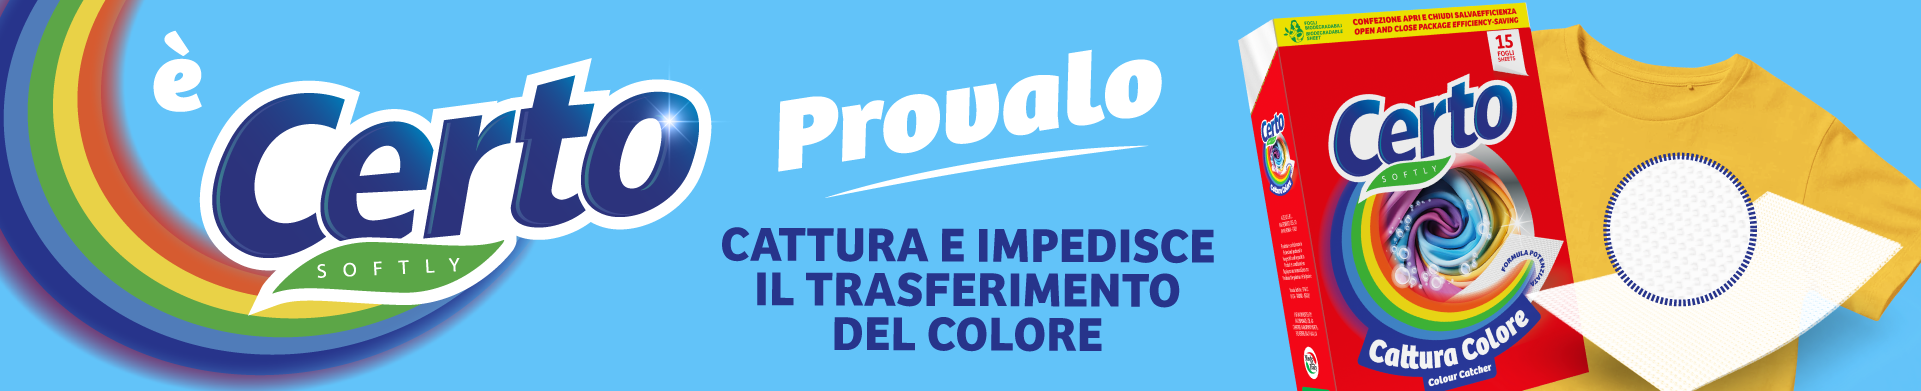 EMPORIO_BANNER ORIZZONTALE 1920x390.png